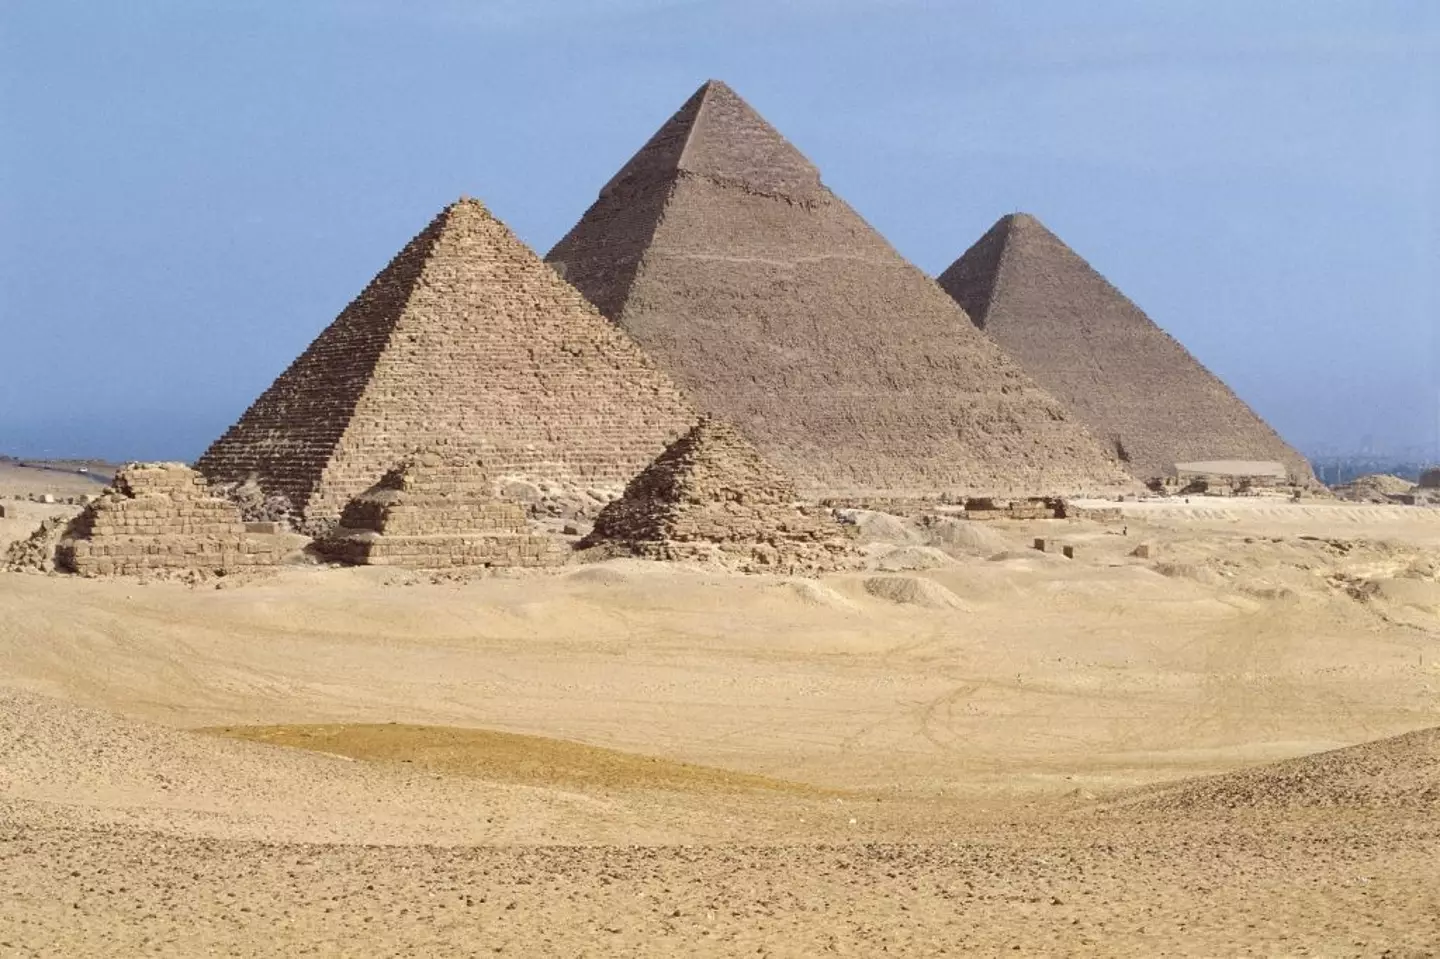 The pyramids are thousands of years old.